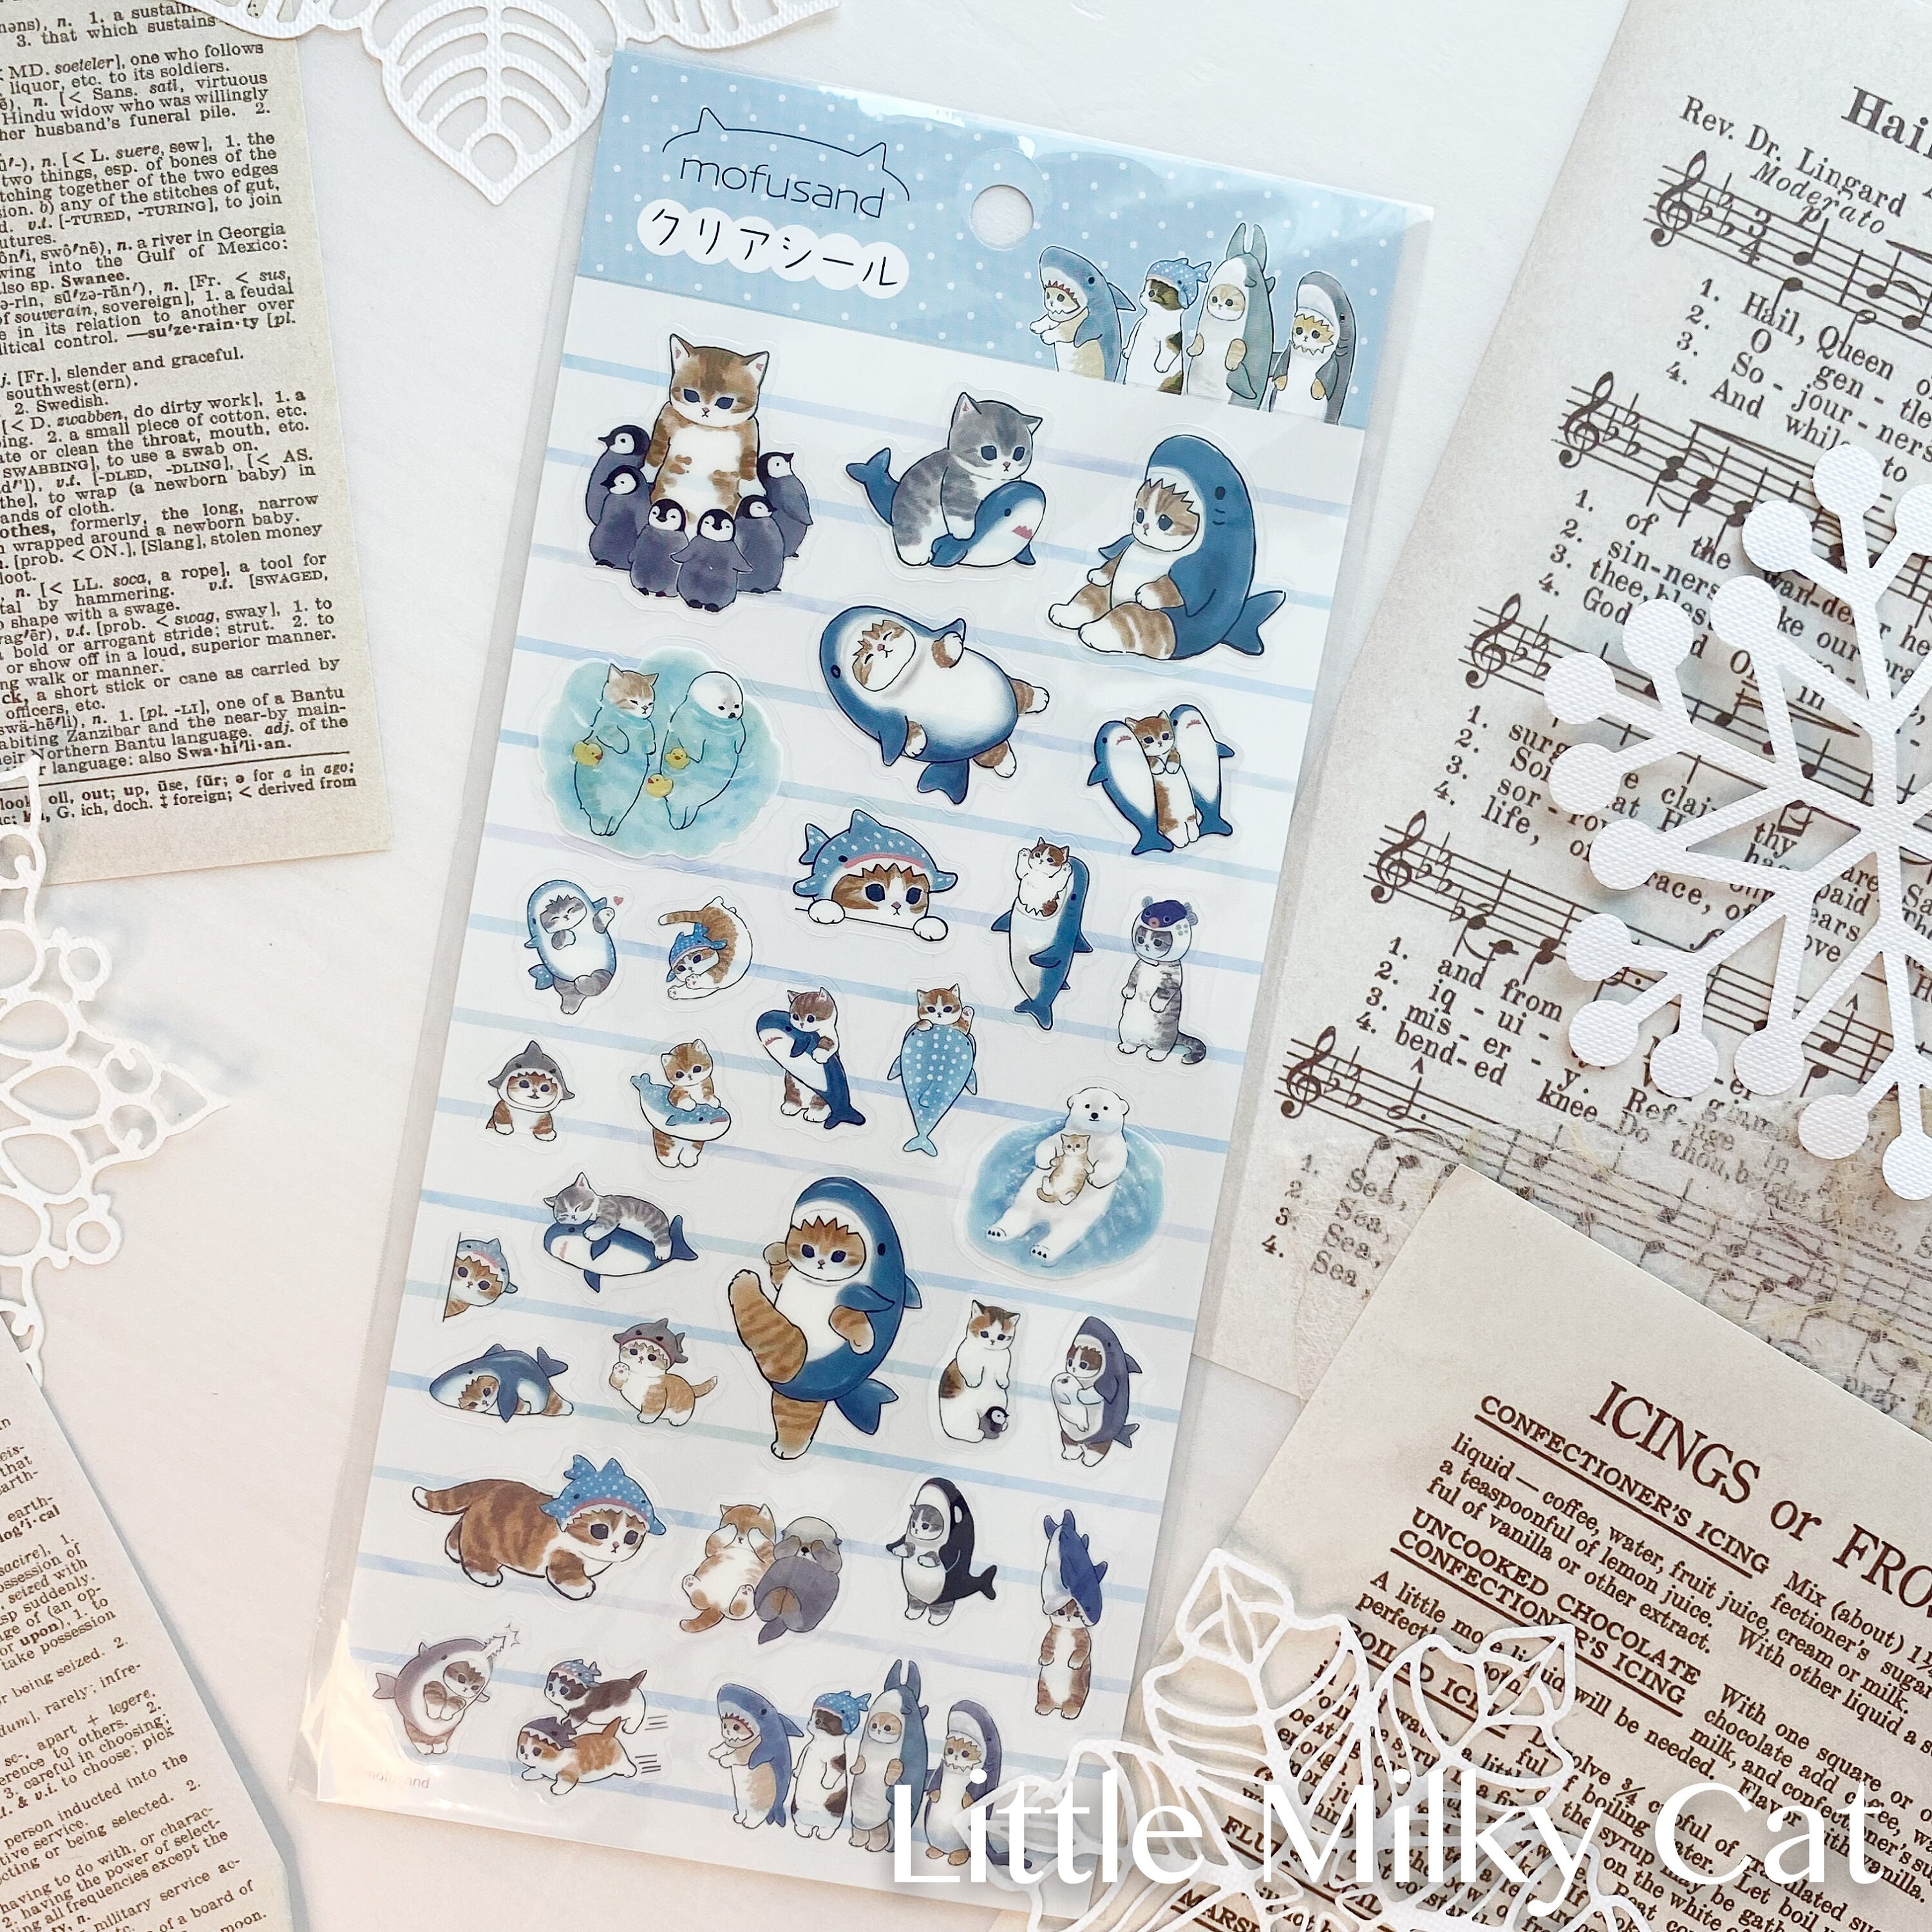 Mofusand Resin Sticker Sheet - Bee Cats — Enigma Stationery